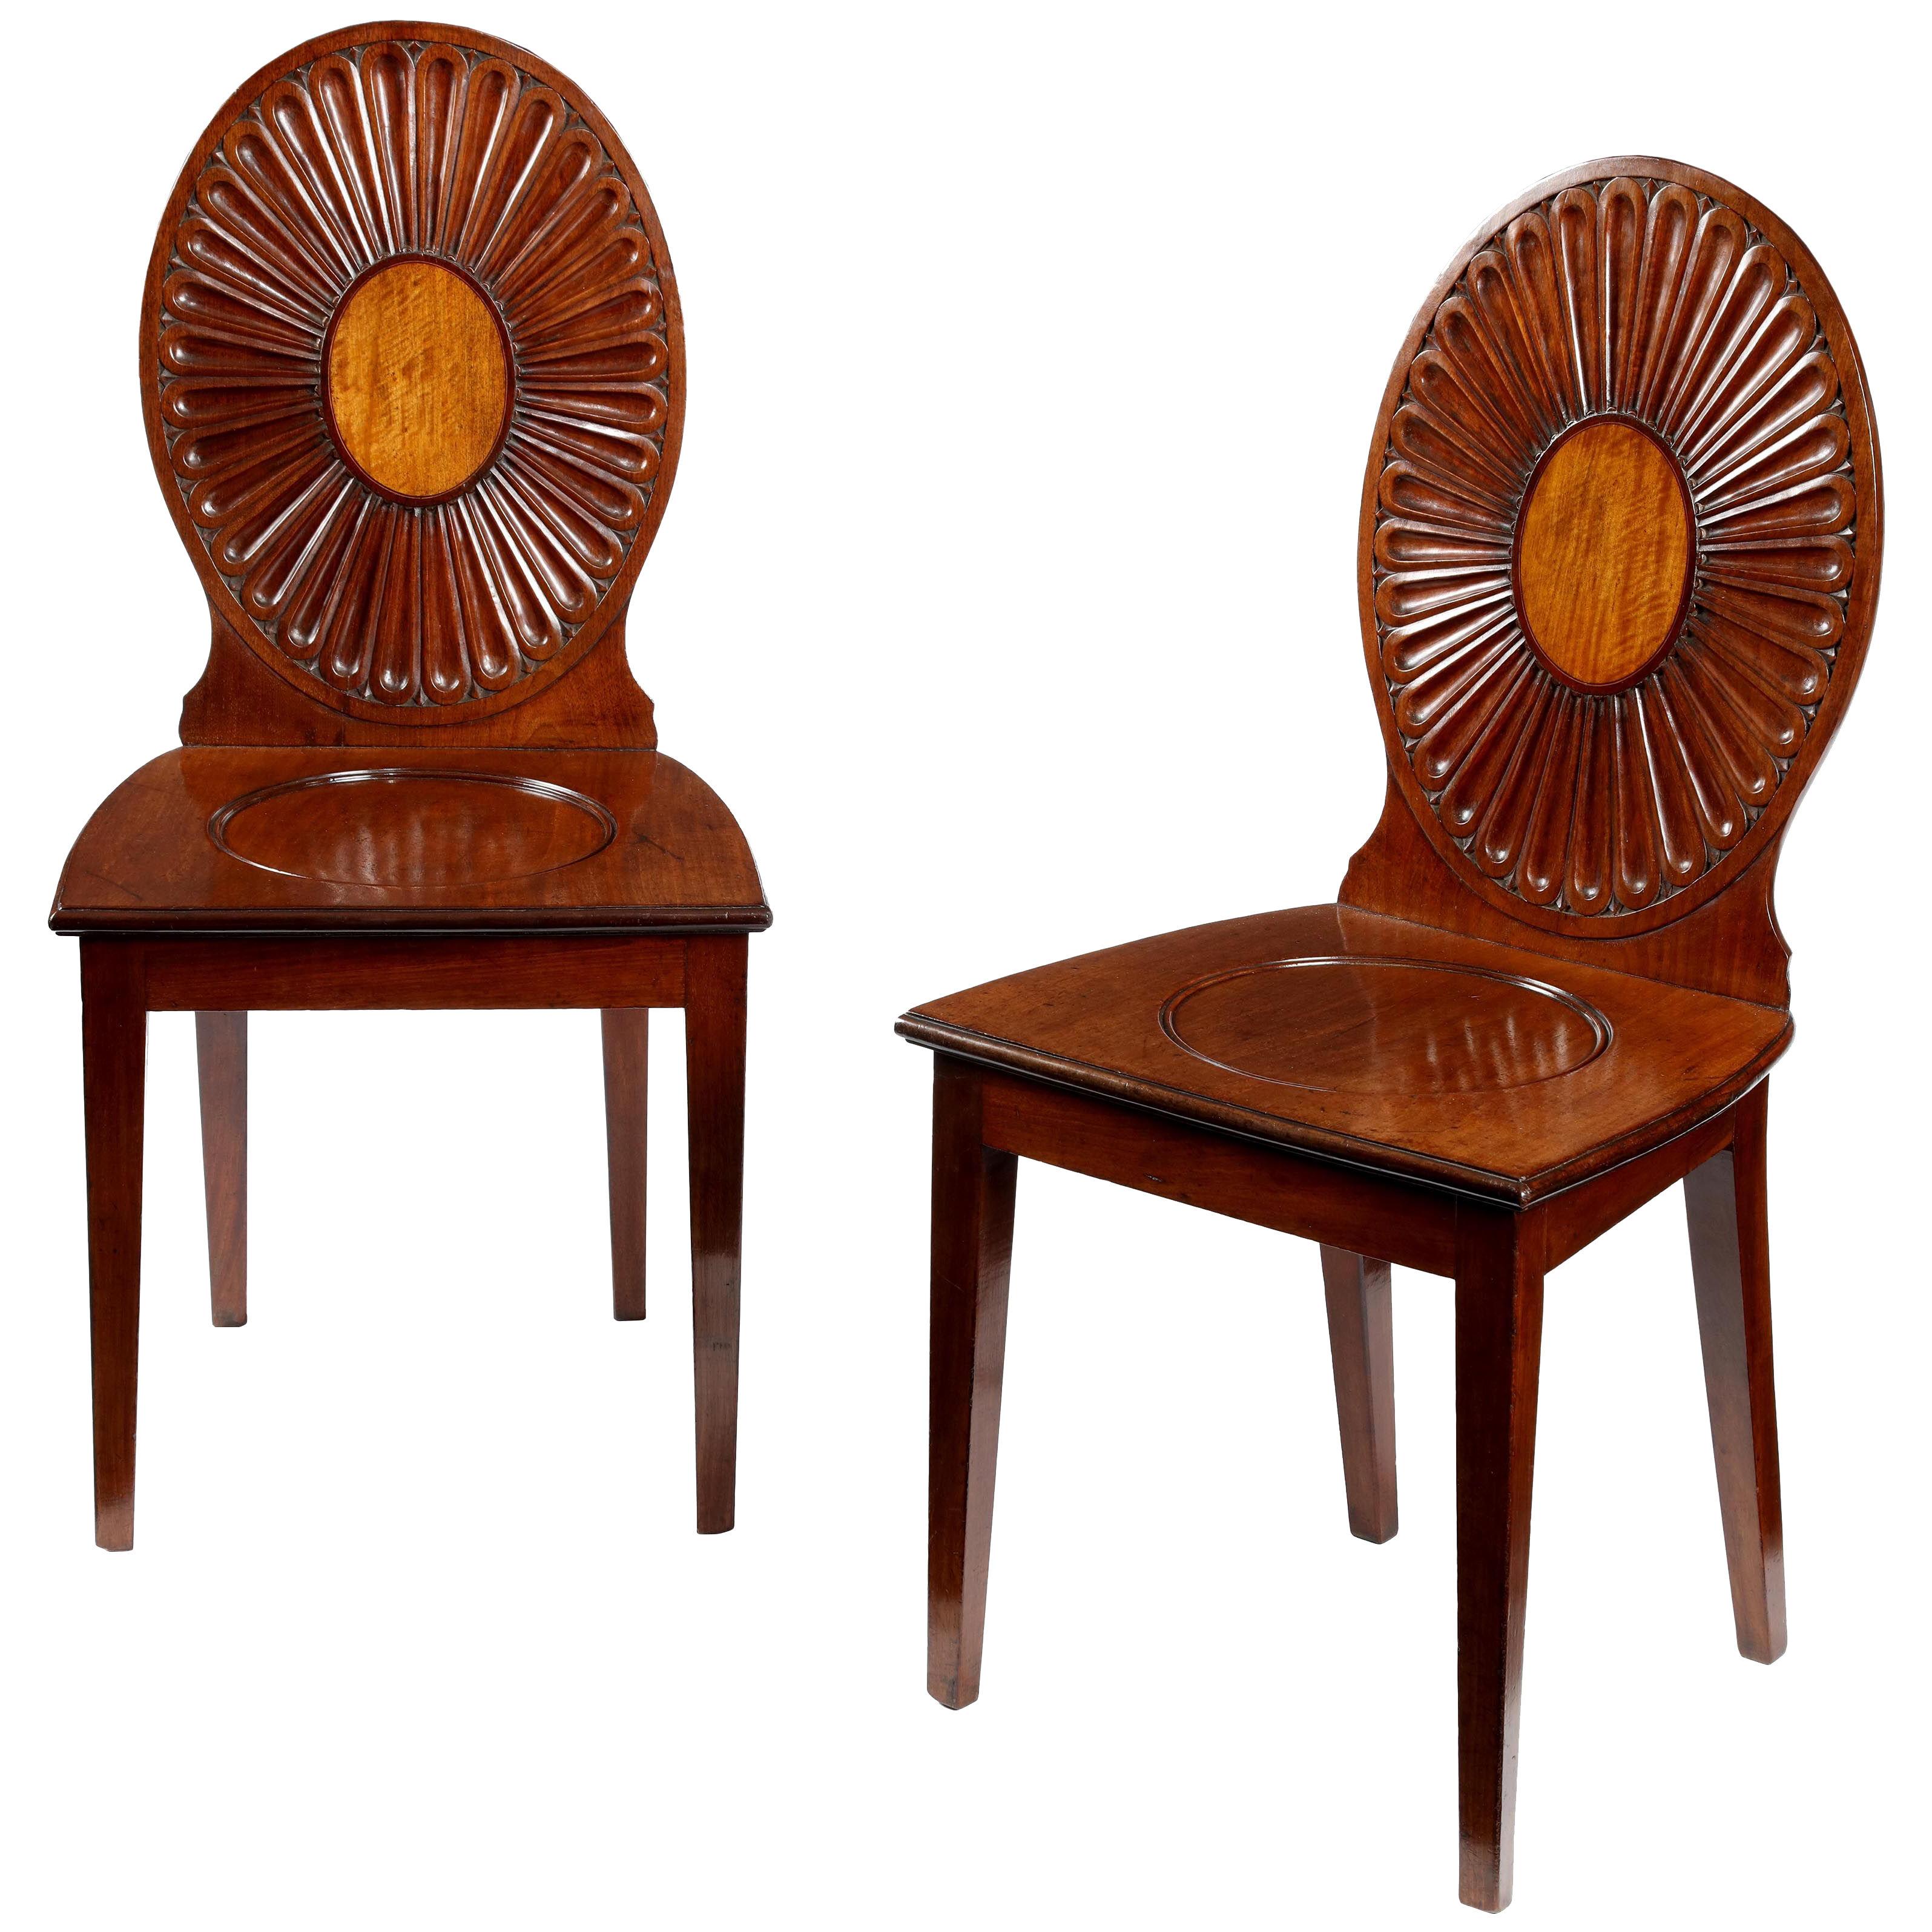 A pair of George III mahogany hall chairs in the manner of Ince & Mayhew